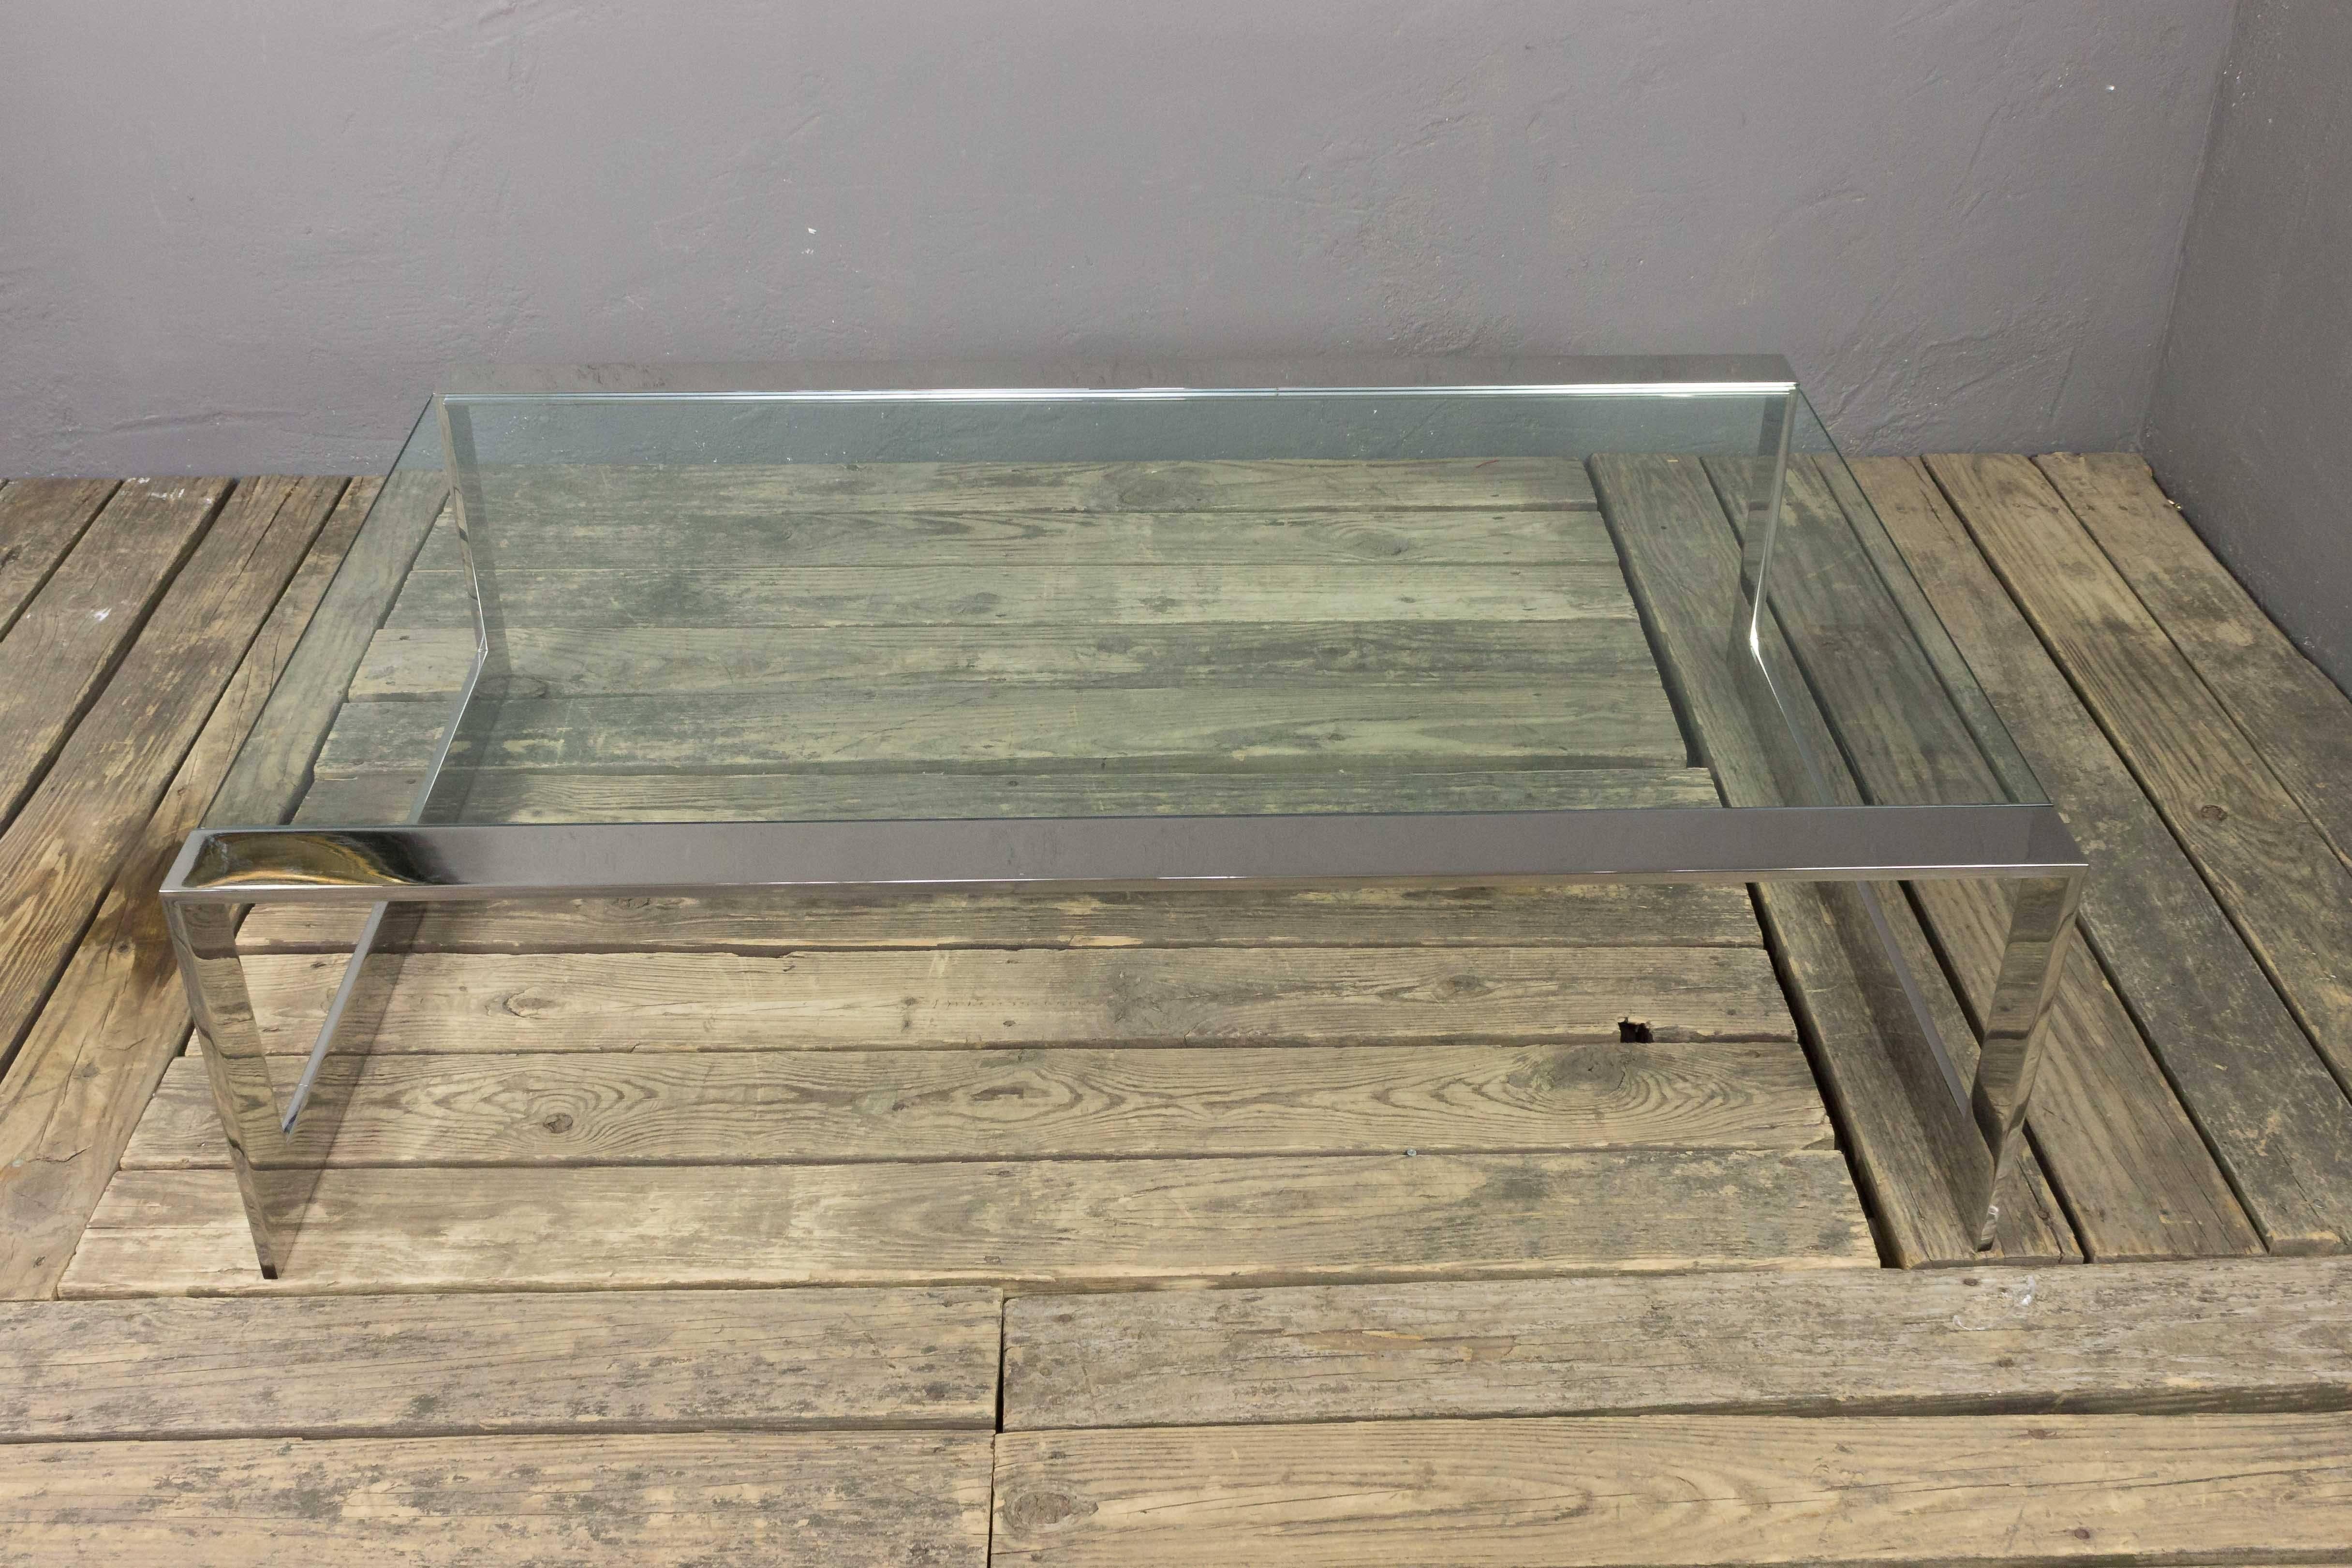 This polished stainless steel coffee table features an inset clear glass top, adding a sleek and contemporary touch to any living space. In very good condition, the frame has been recently polished, giving it a clean and shiny appearance. While